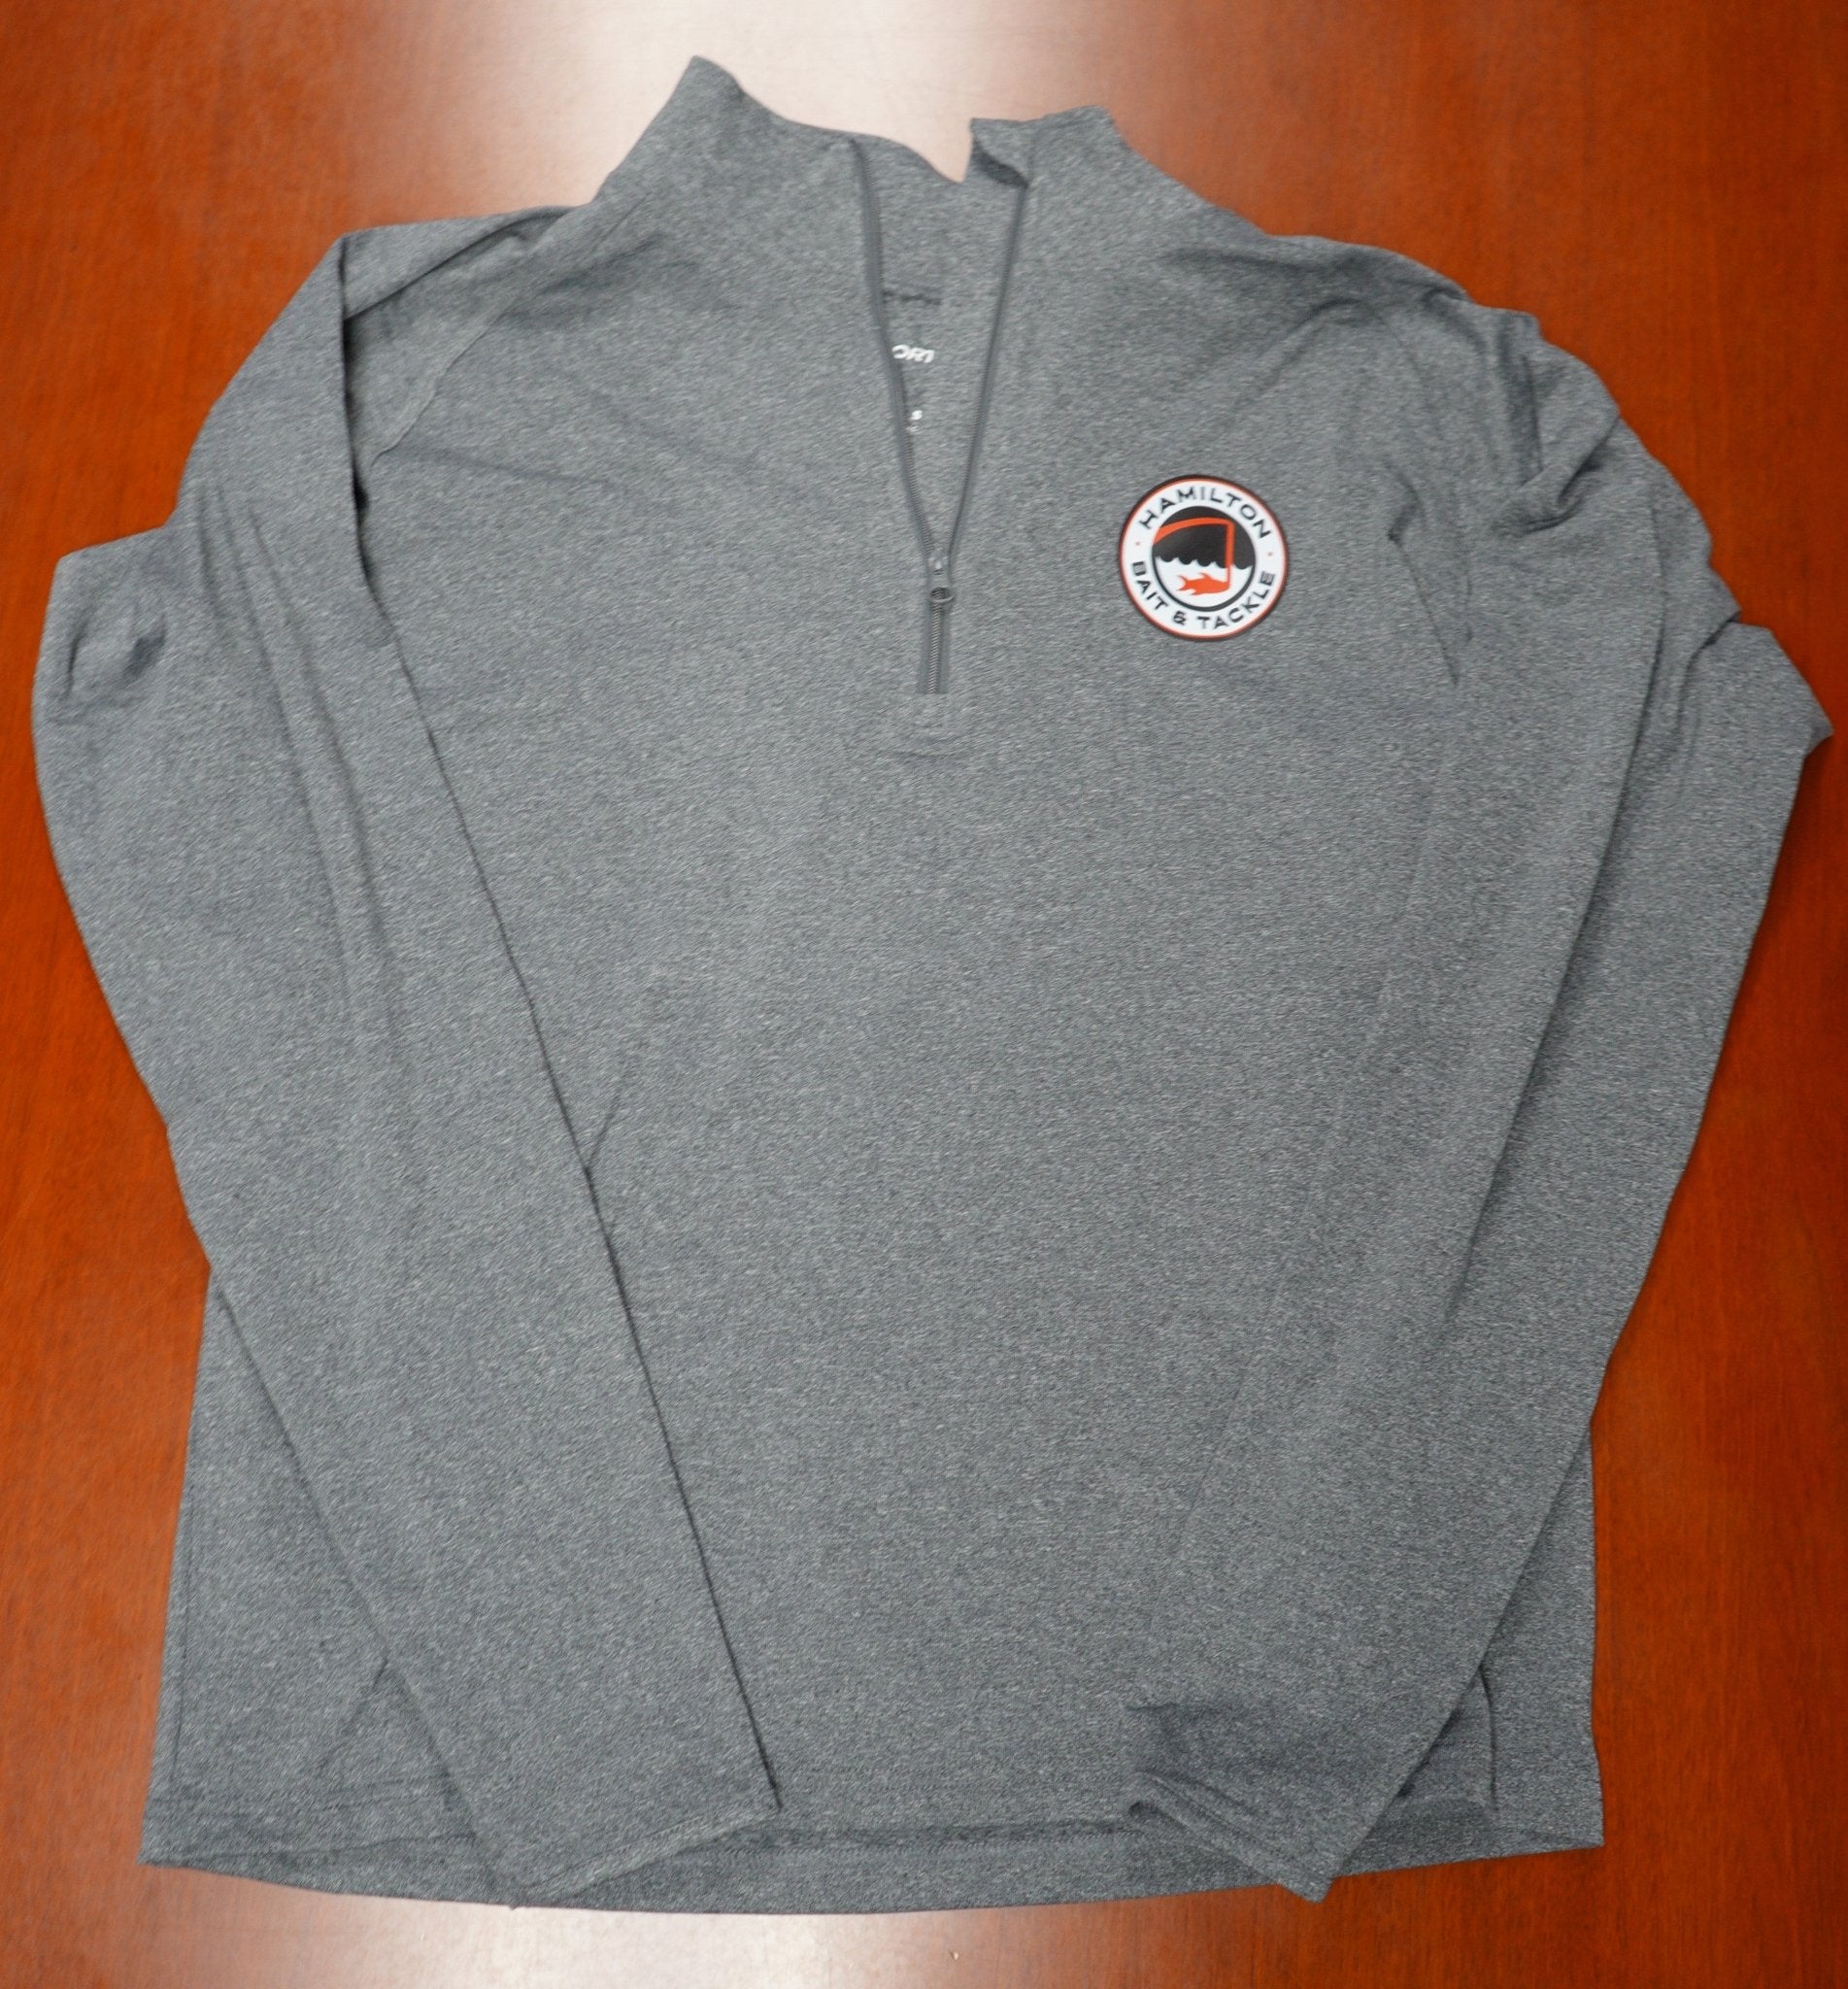 HBT 1/4 Zip Pullover - Hamilton Bait and Tackle